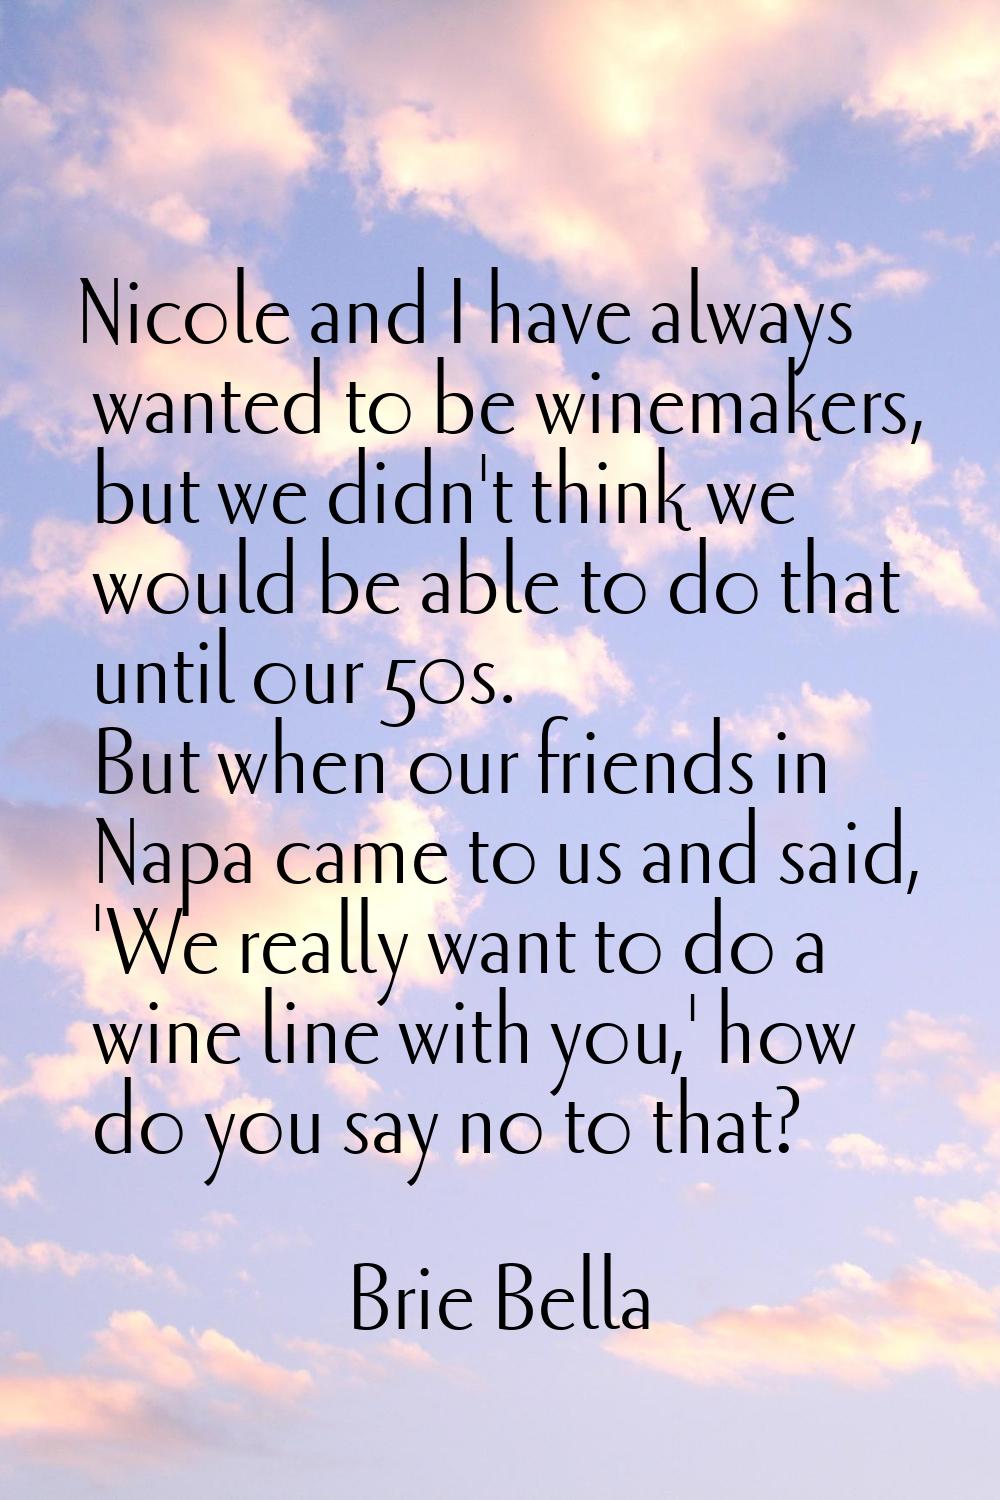 Nicole and I have always wanted to be winemakers, but we didn't think we would be able to do that u